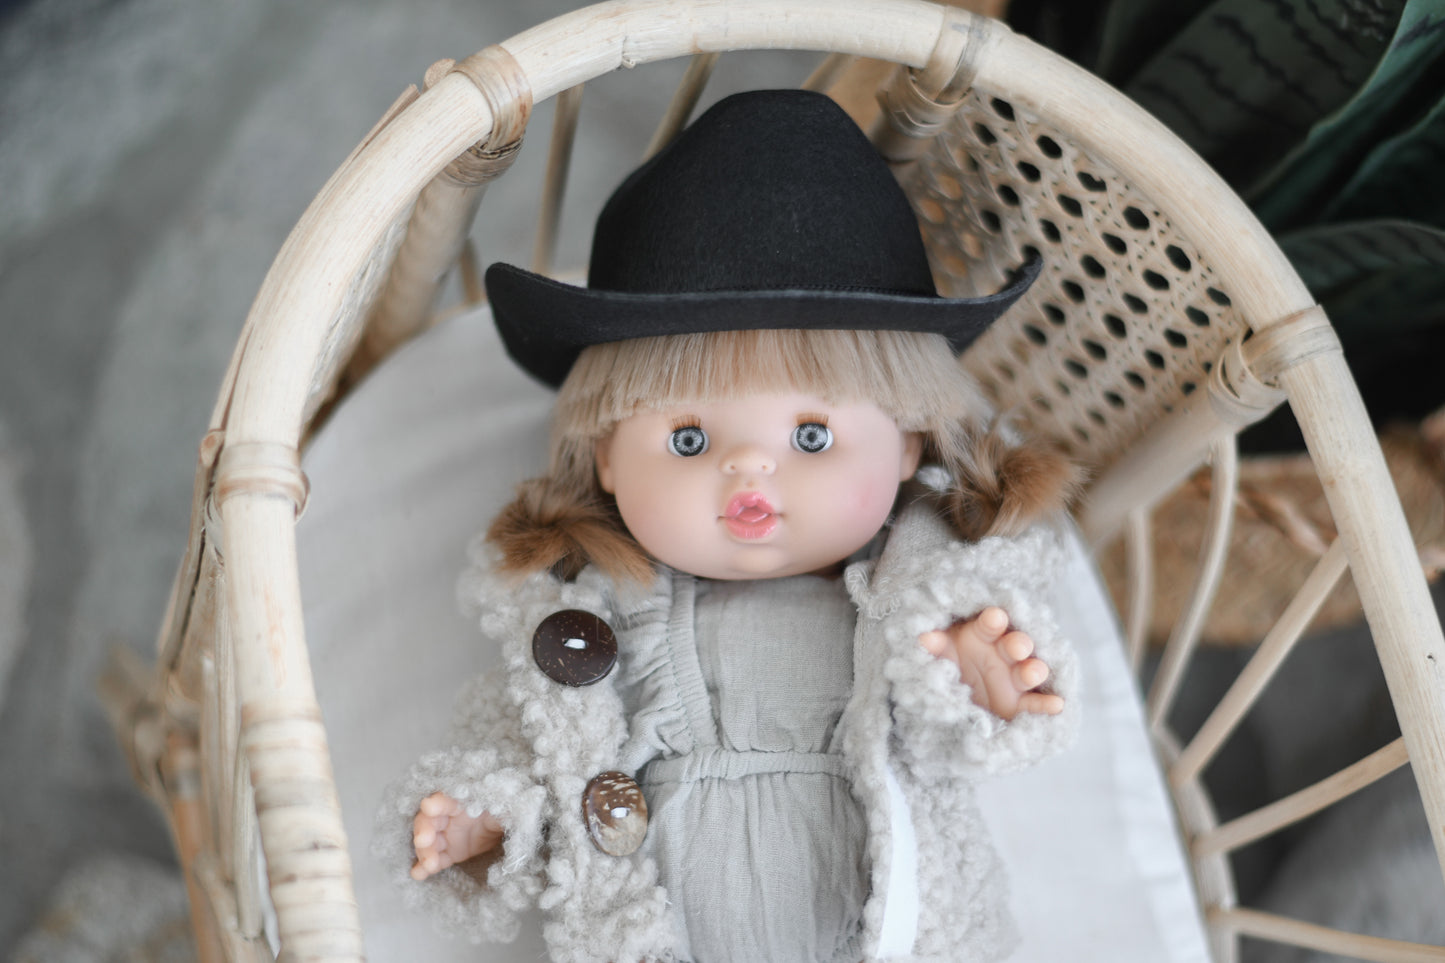 Yze With Boho Cowgirl Outfit- Minikane Girl Doll - OOAK